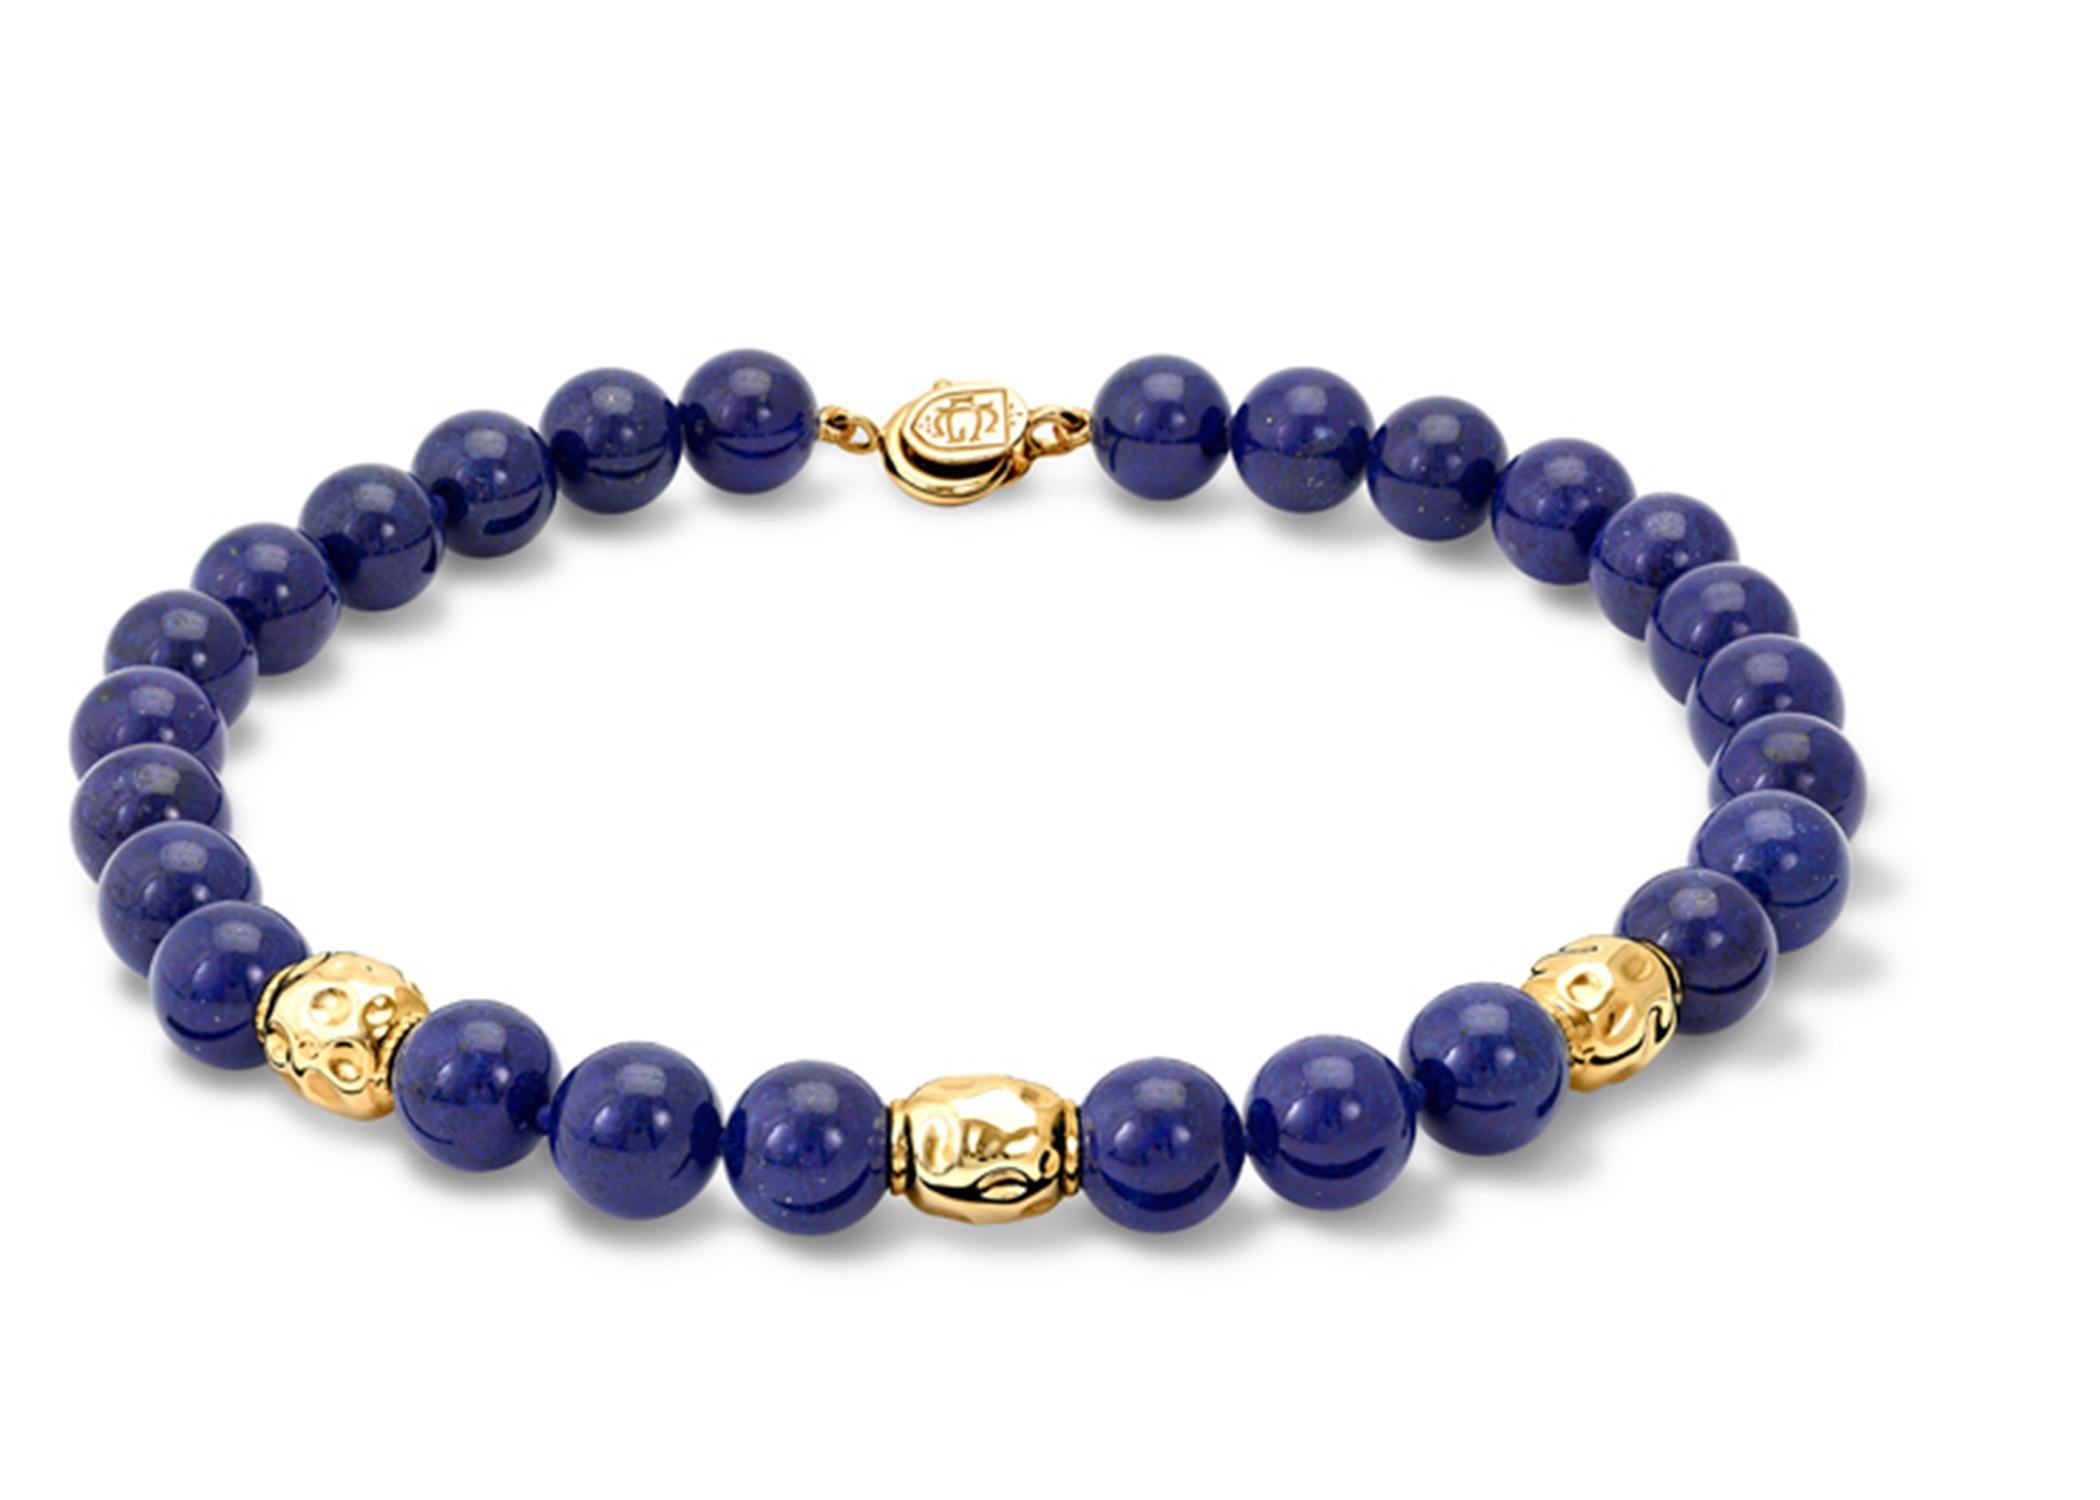 Astarte necklace of 12 mm Lapis Lazuli beads strung knotted with three Astarte spacers in 9 carat yellow gold in the form of a beaten gold bead and with a 9 carat yellow gold Lowe clasp. Astarte was the Phoenician Goddess, known to the Greeks as